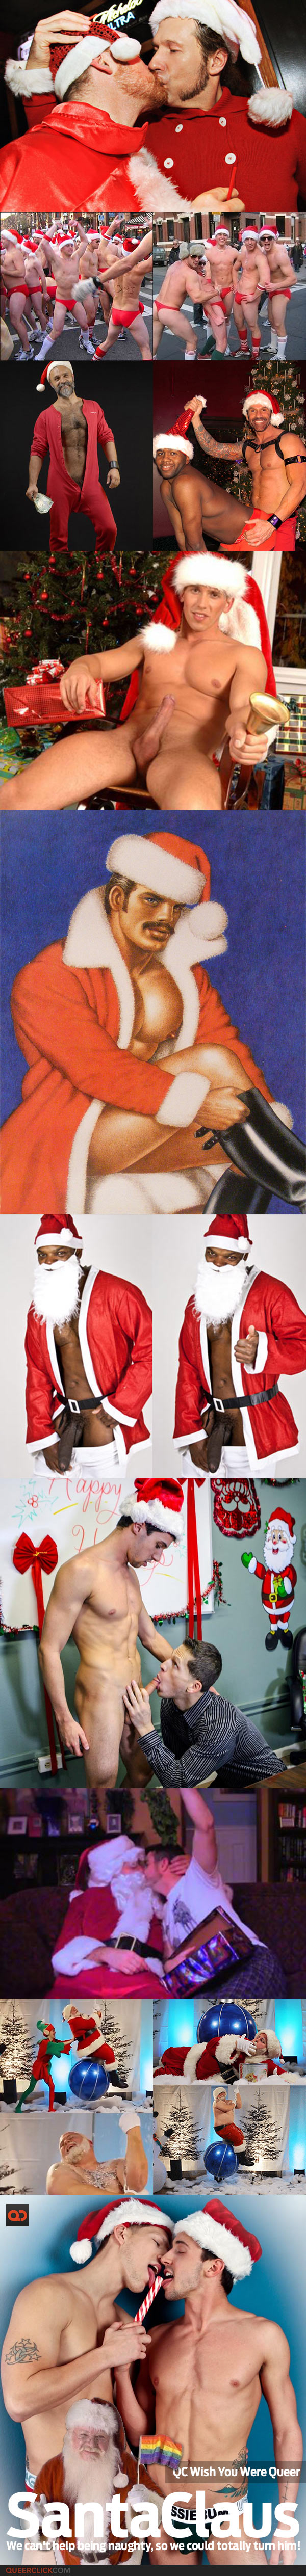 QC's Wish You Were Queer: Santa Claus!